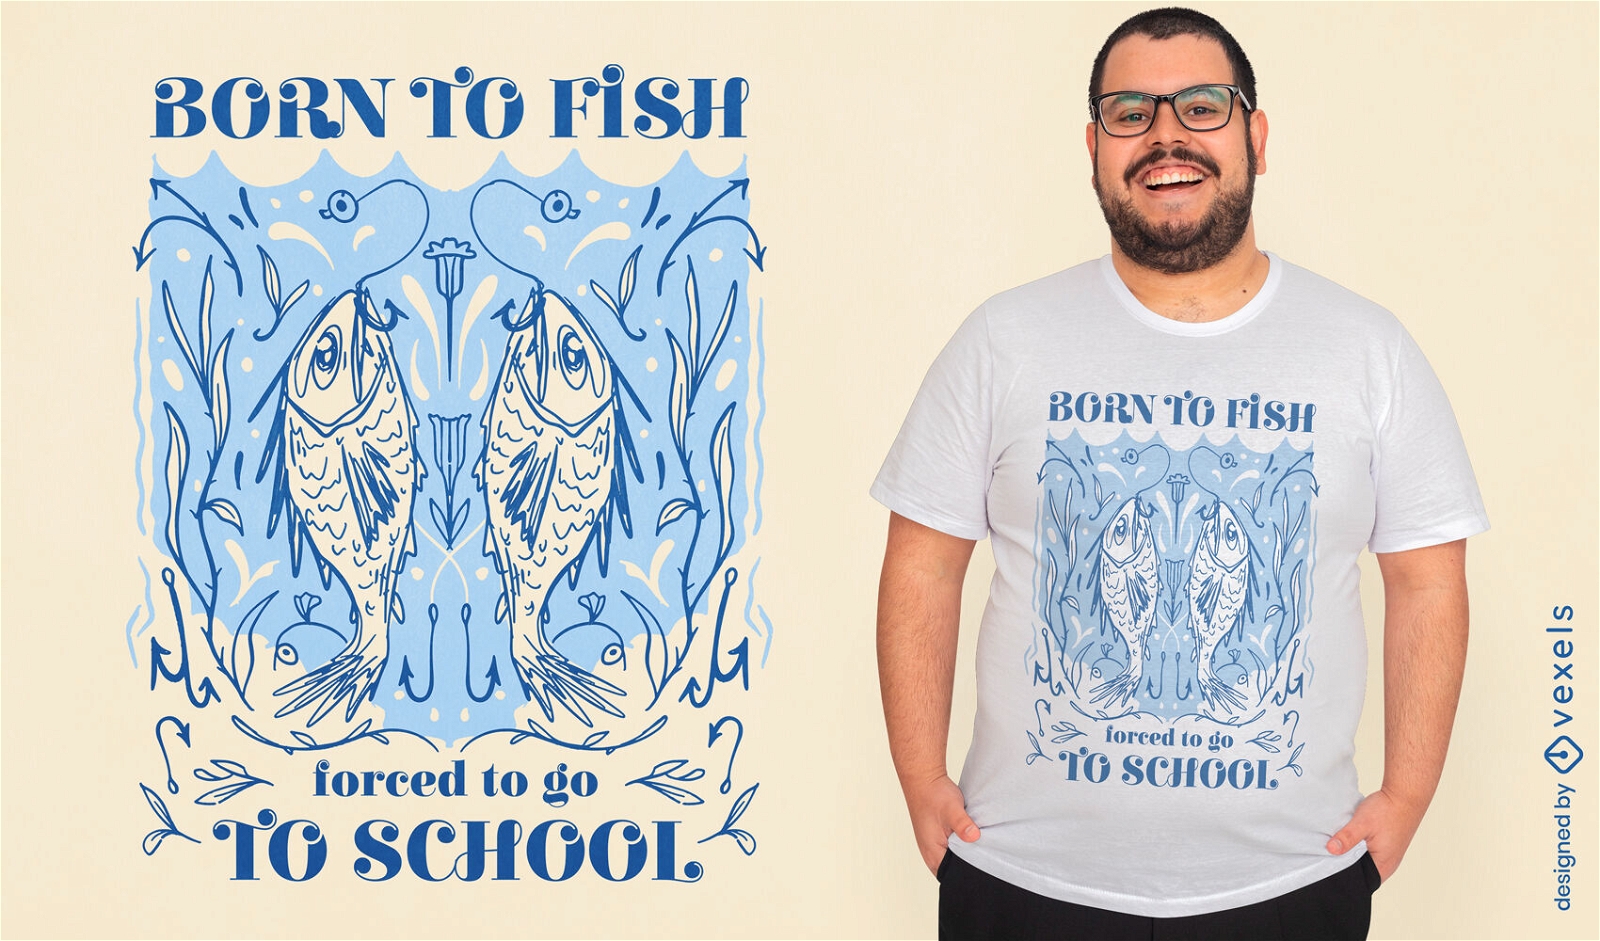 Born to fish funny quote t-shirt design